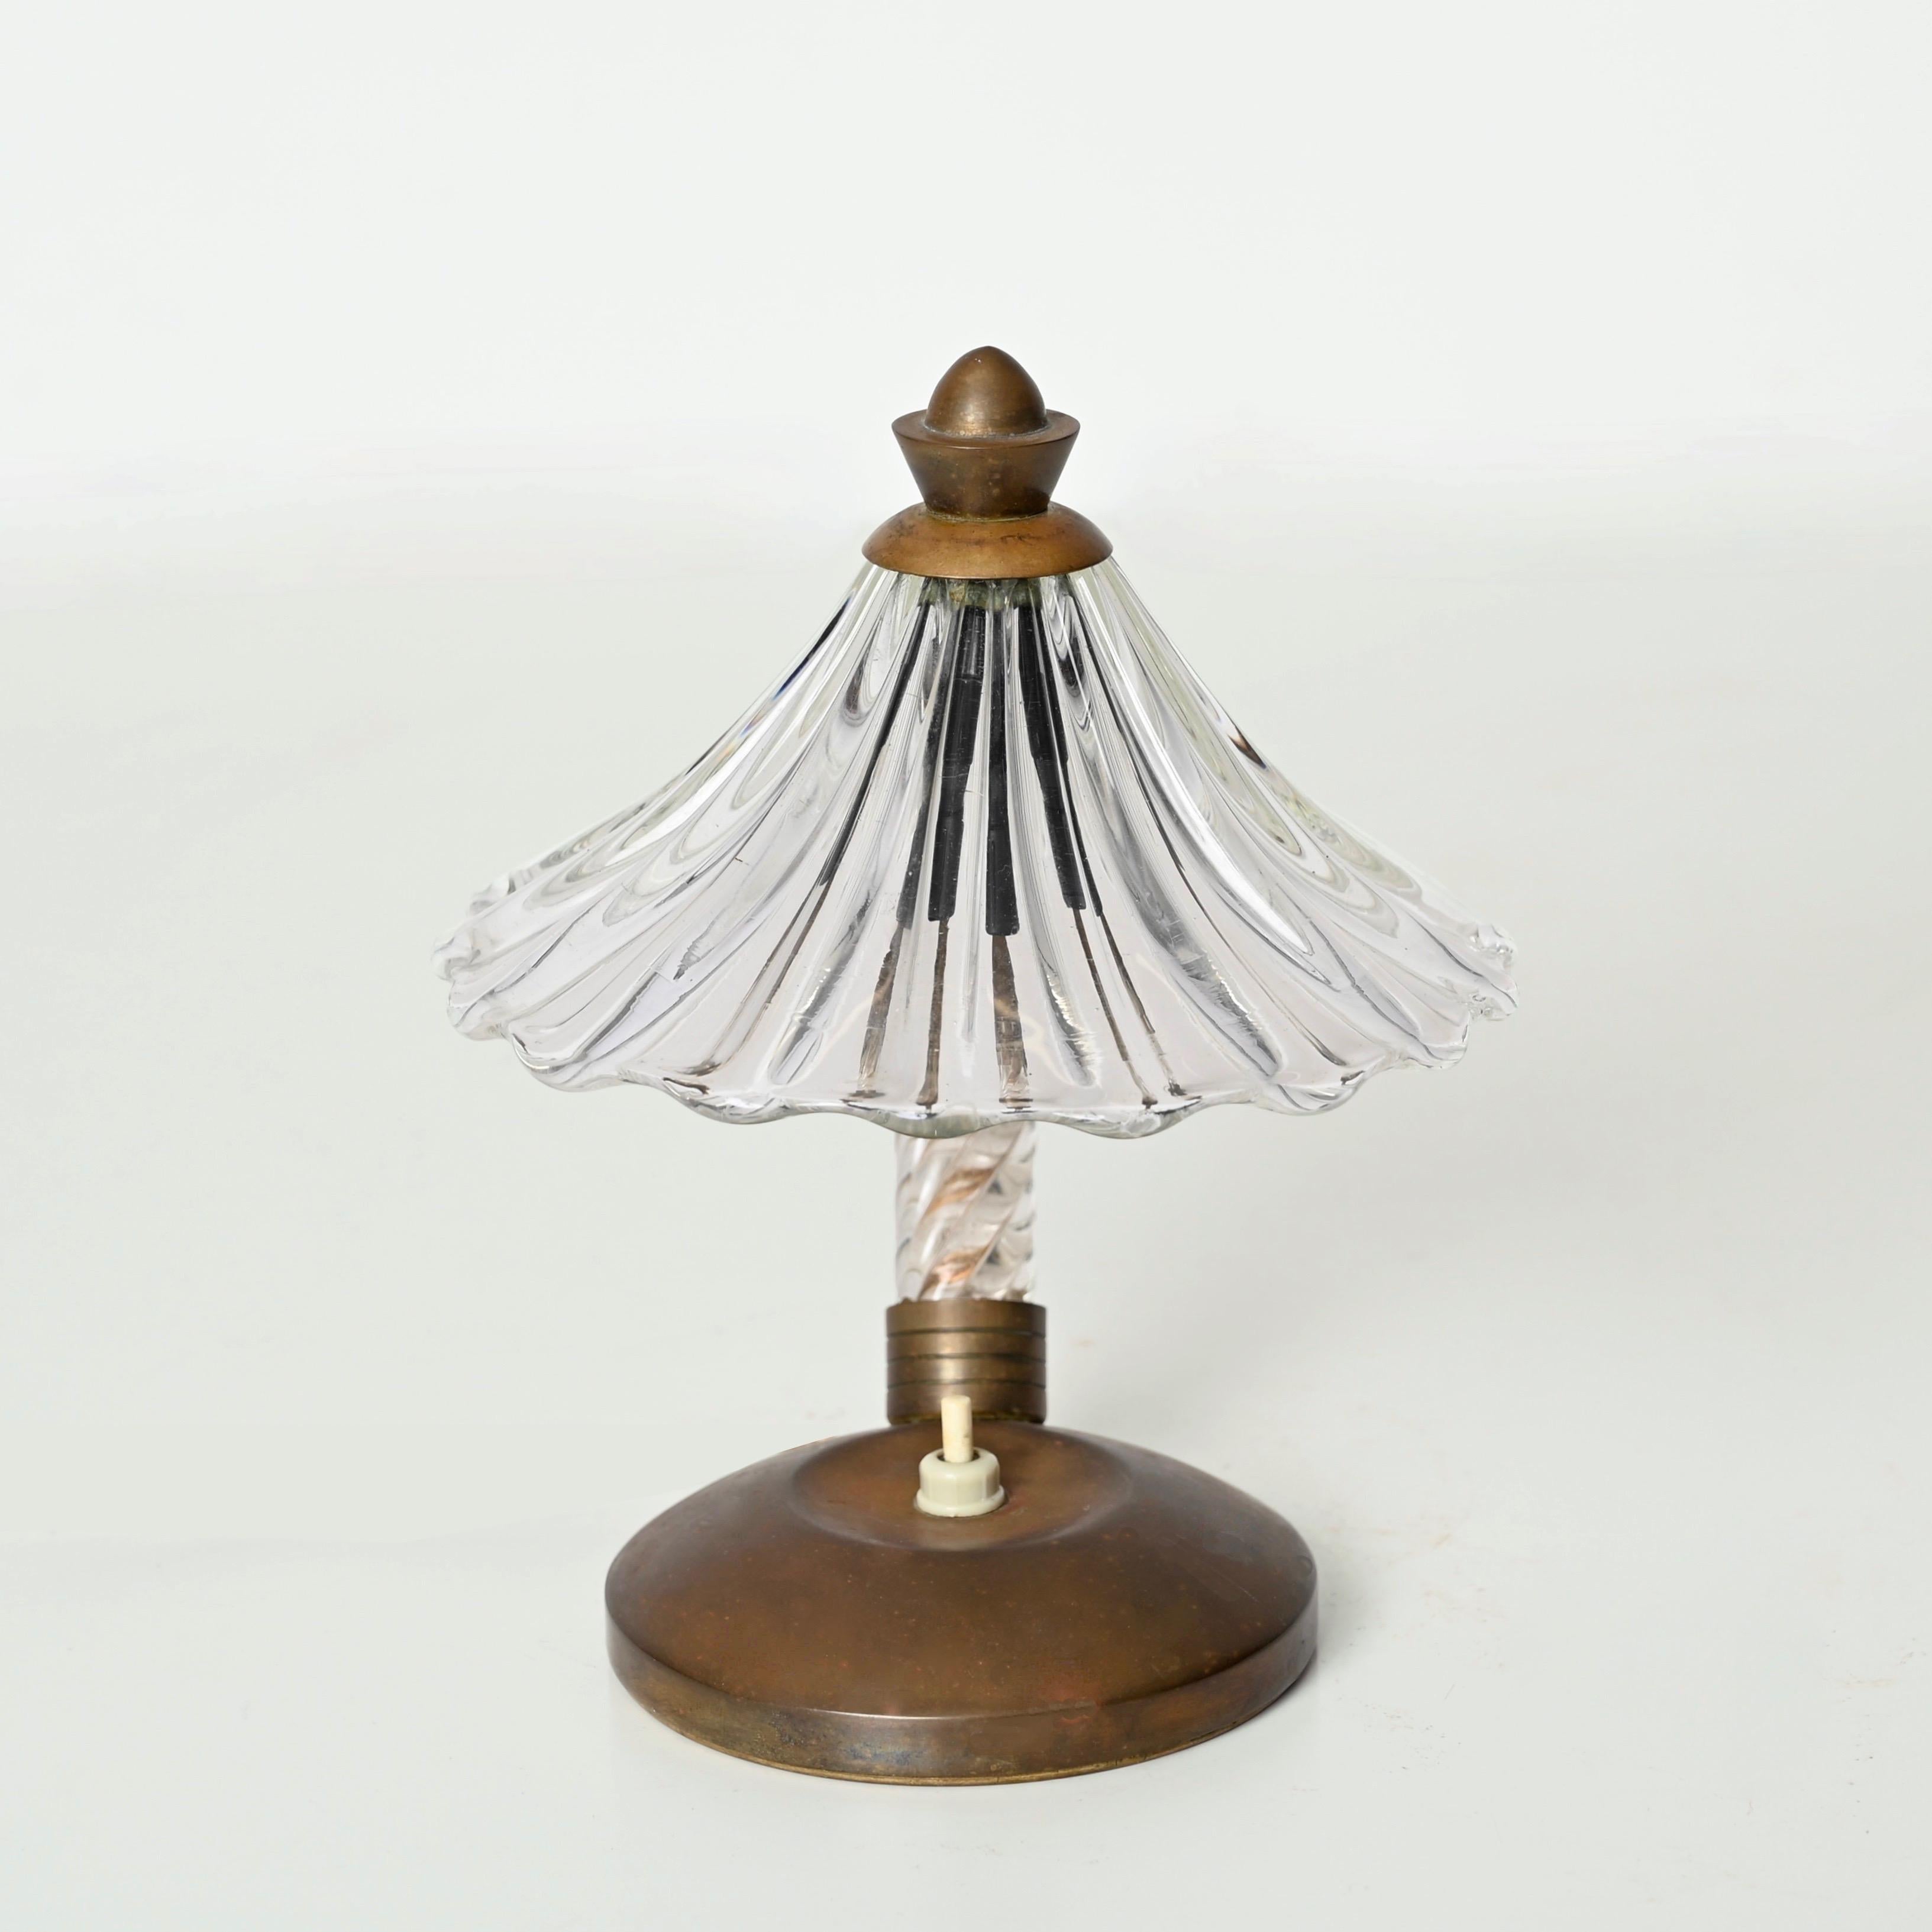 Italian Bellflower Table Lamp in Murano Glass and Brass by Ercole Barovier, Italy 1940s For Sale